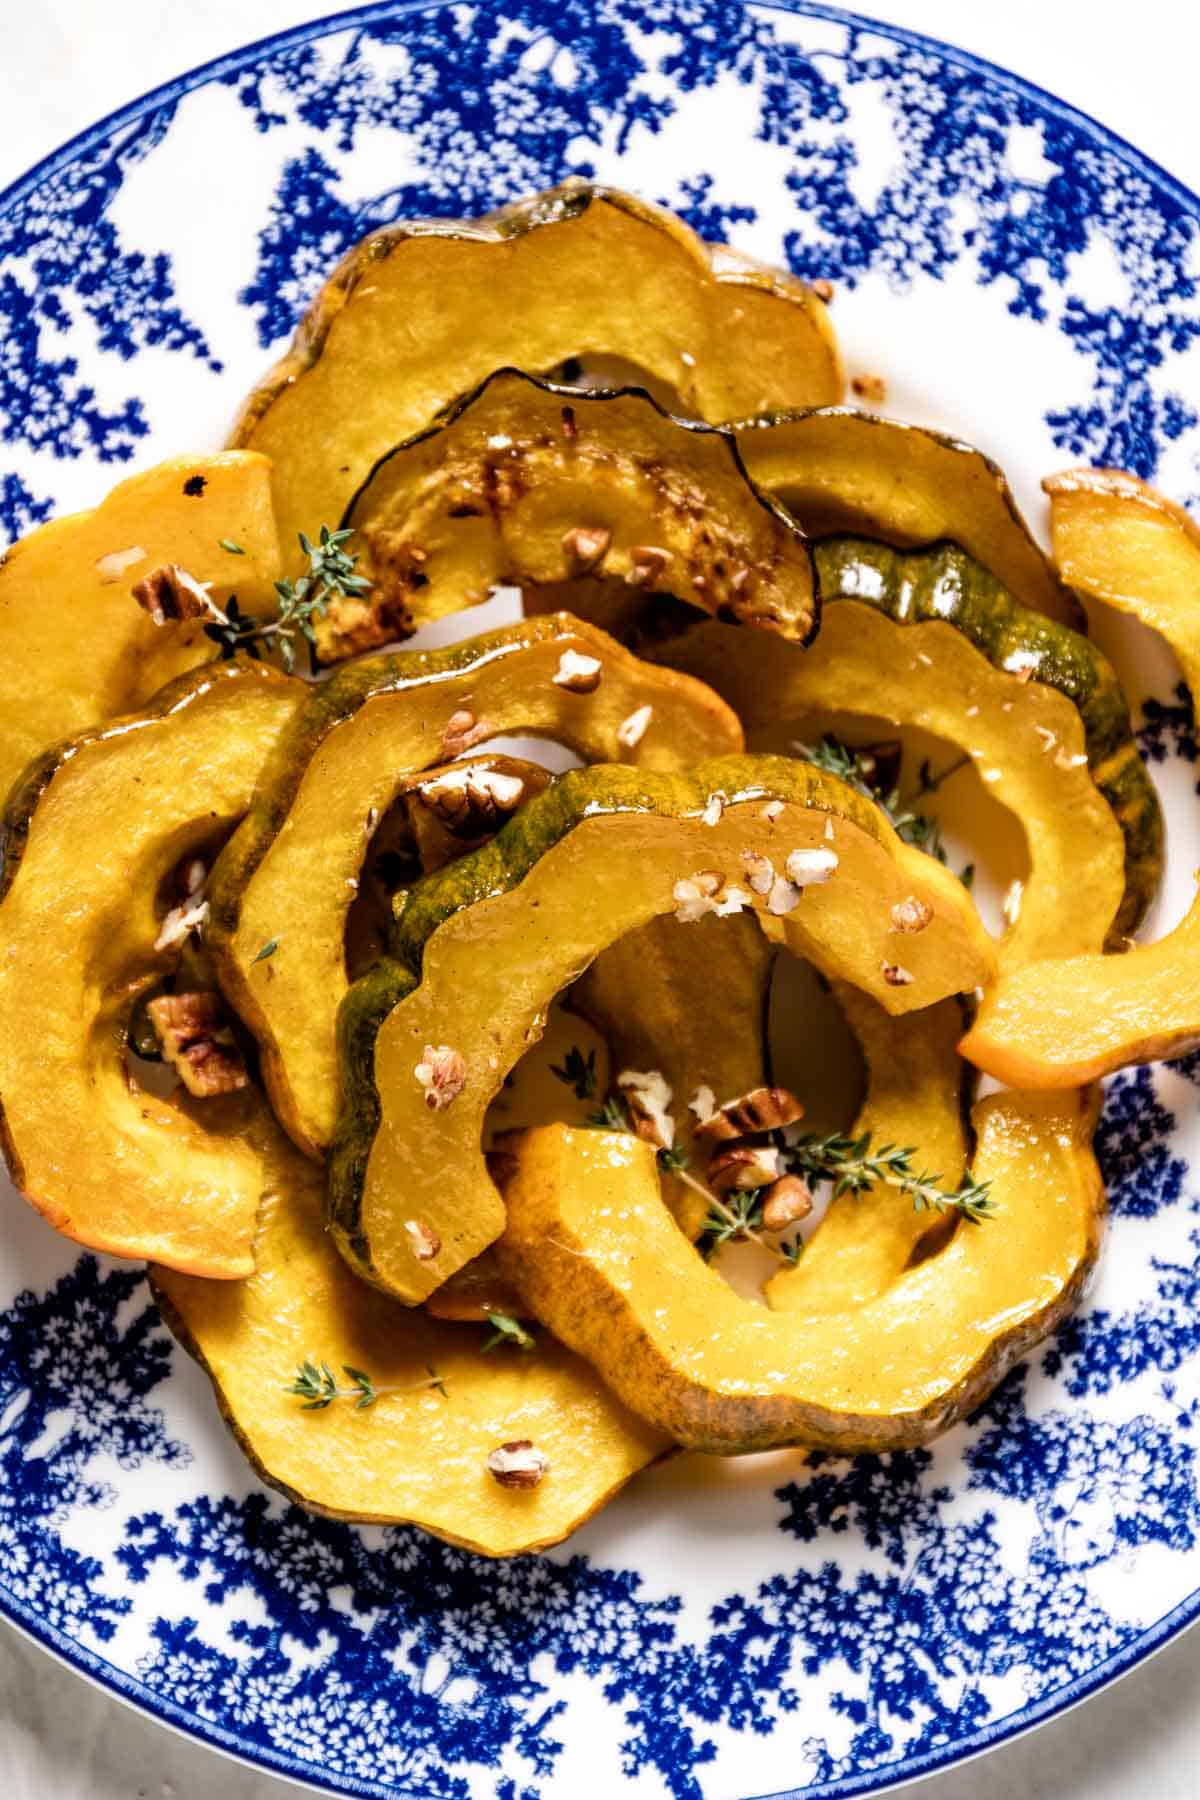 A plate of squash that has been roasted in the oven shown from the top view.